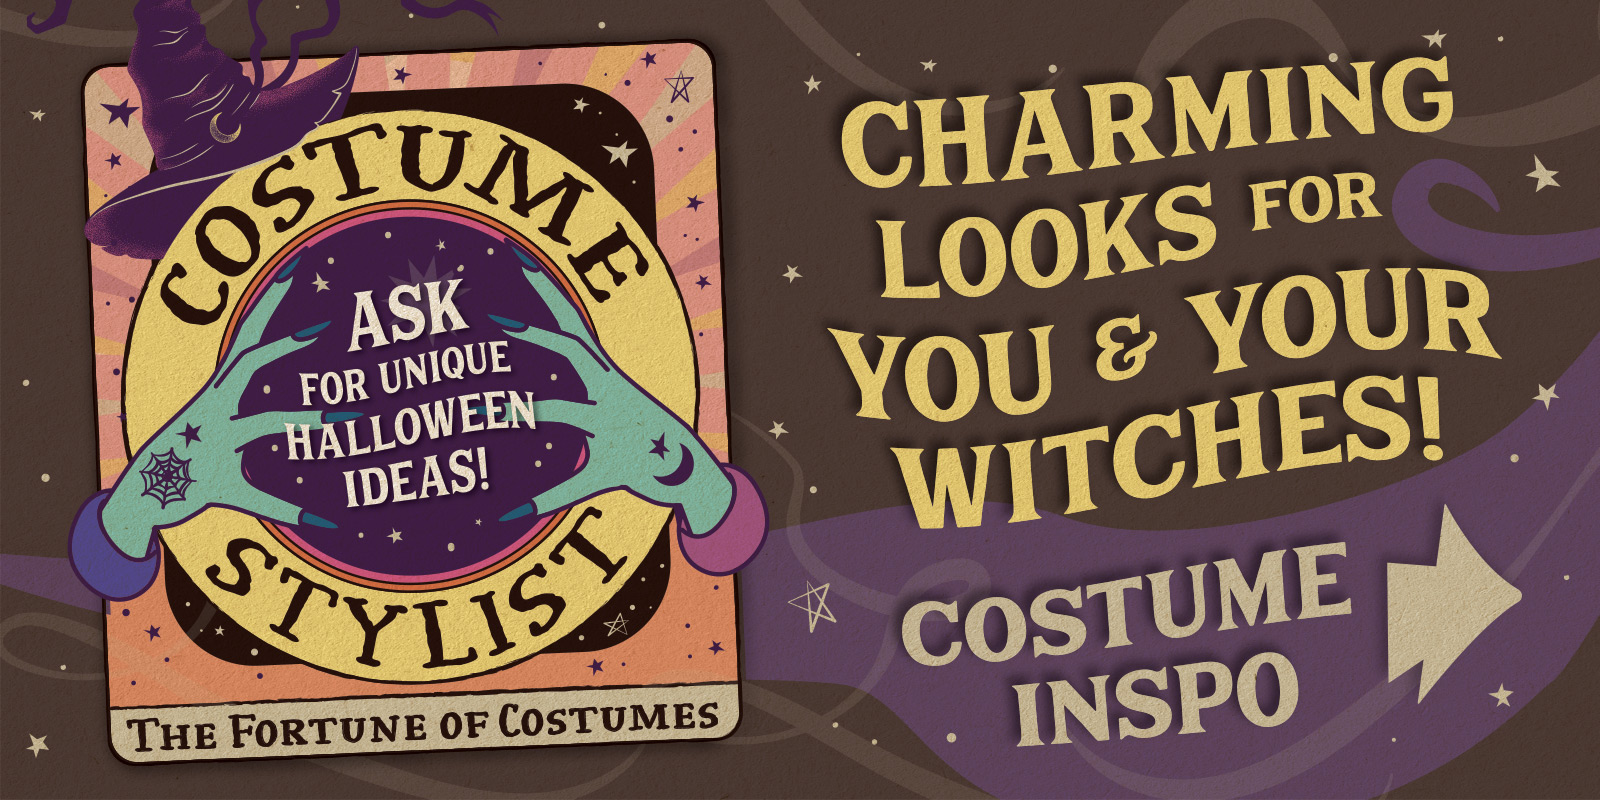 Charming Looks for You & Your Witches! [Tarot card with witch hands and crystal ball illustrated saying:] Costume Stylist: Ask for unique Halloween ideas! The Fortune of Costumes. Costume Inspo